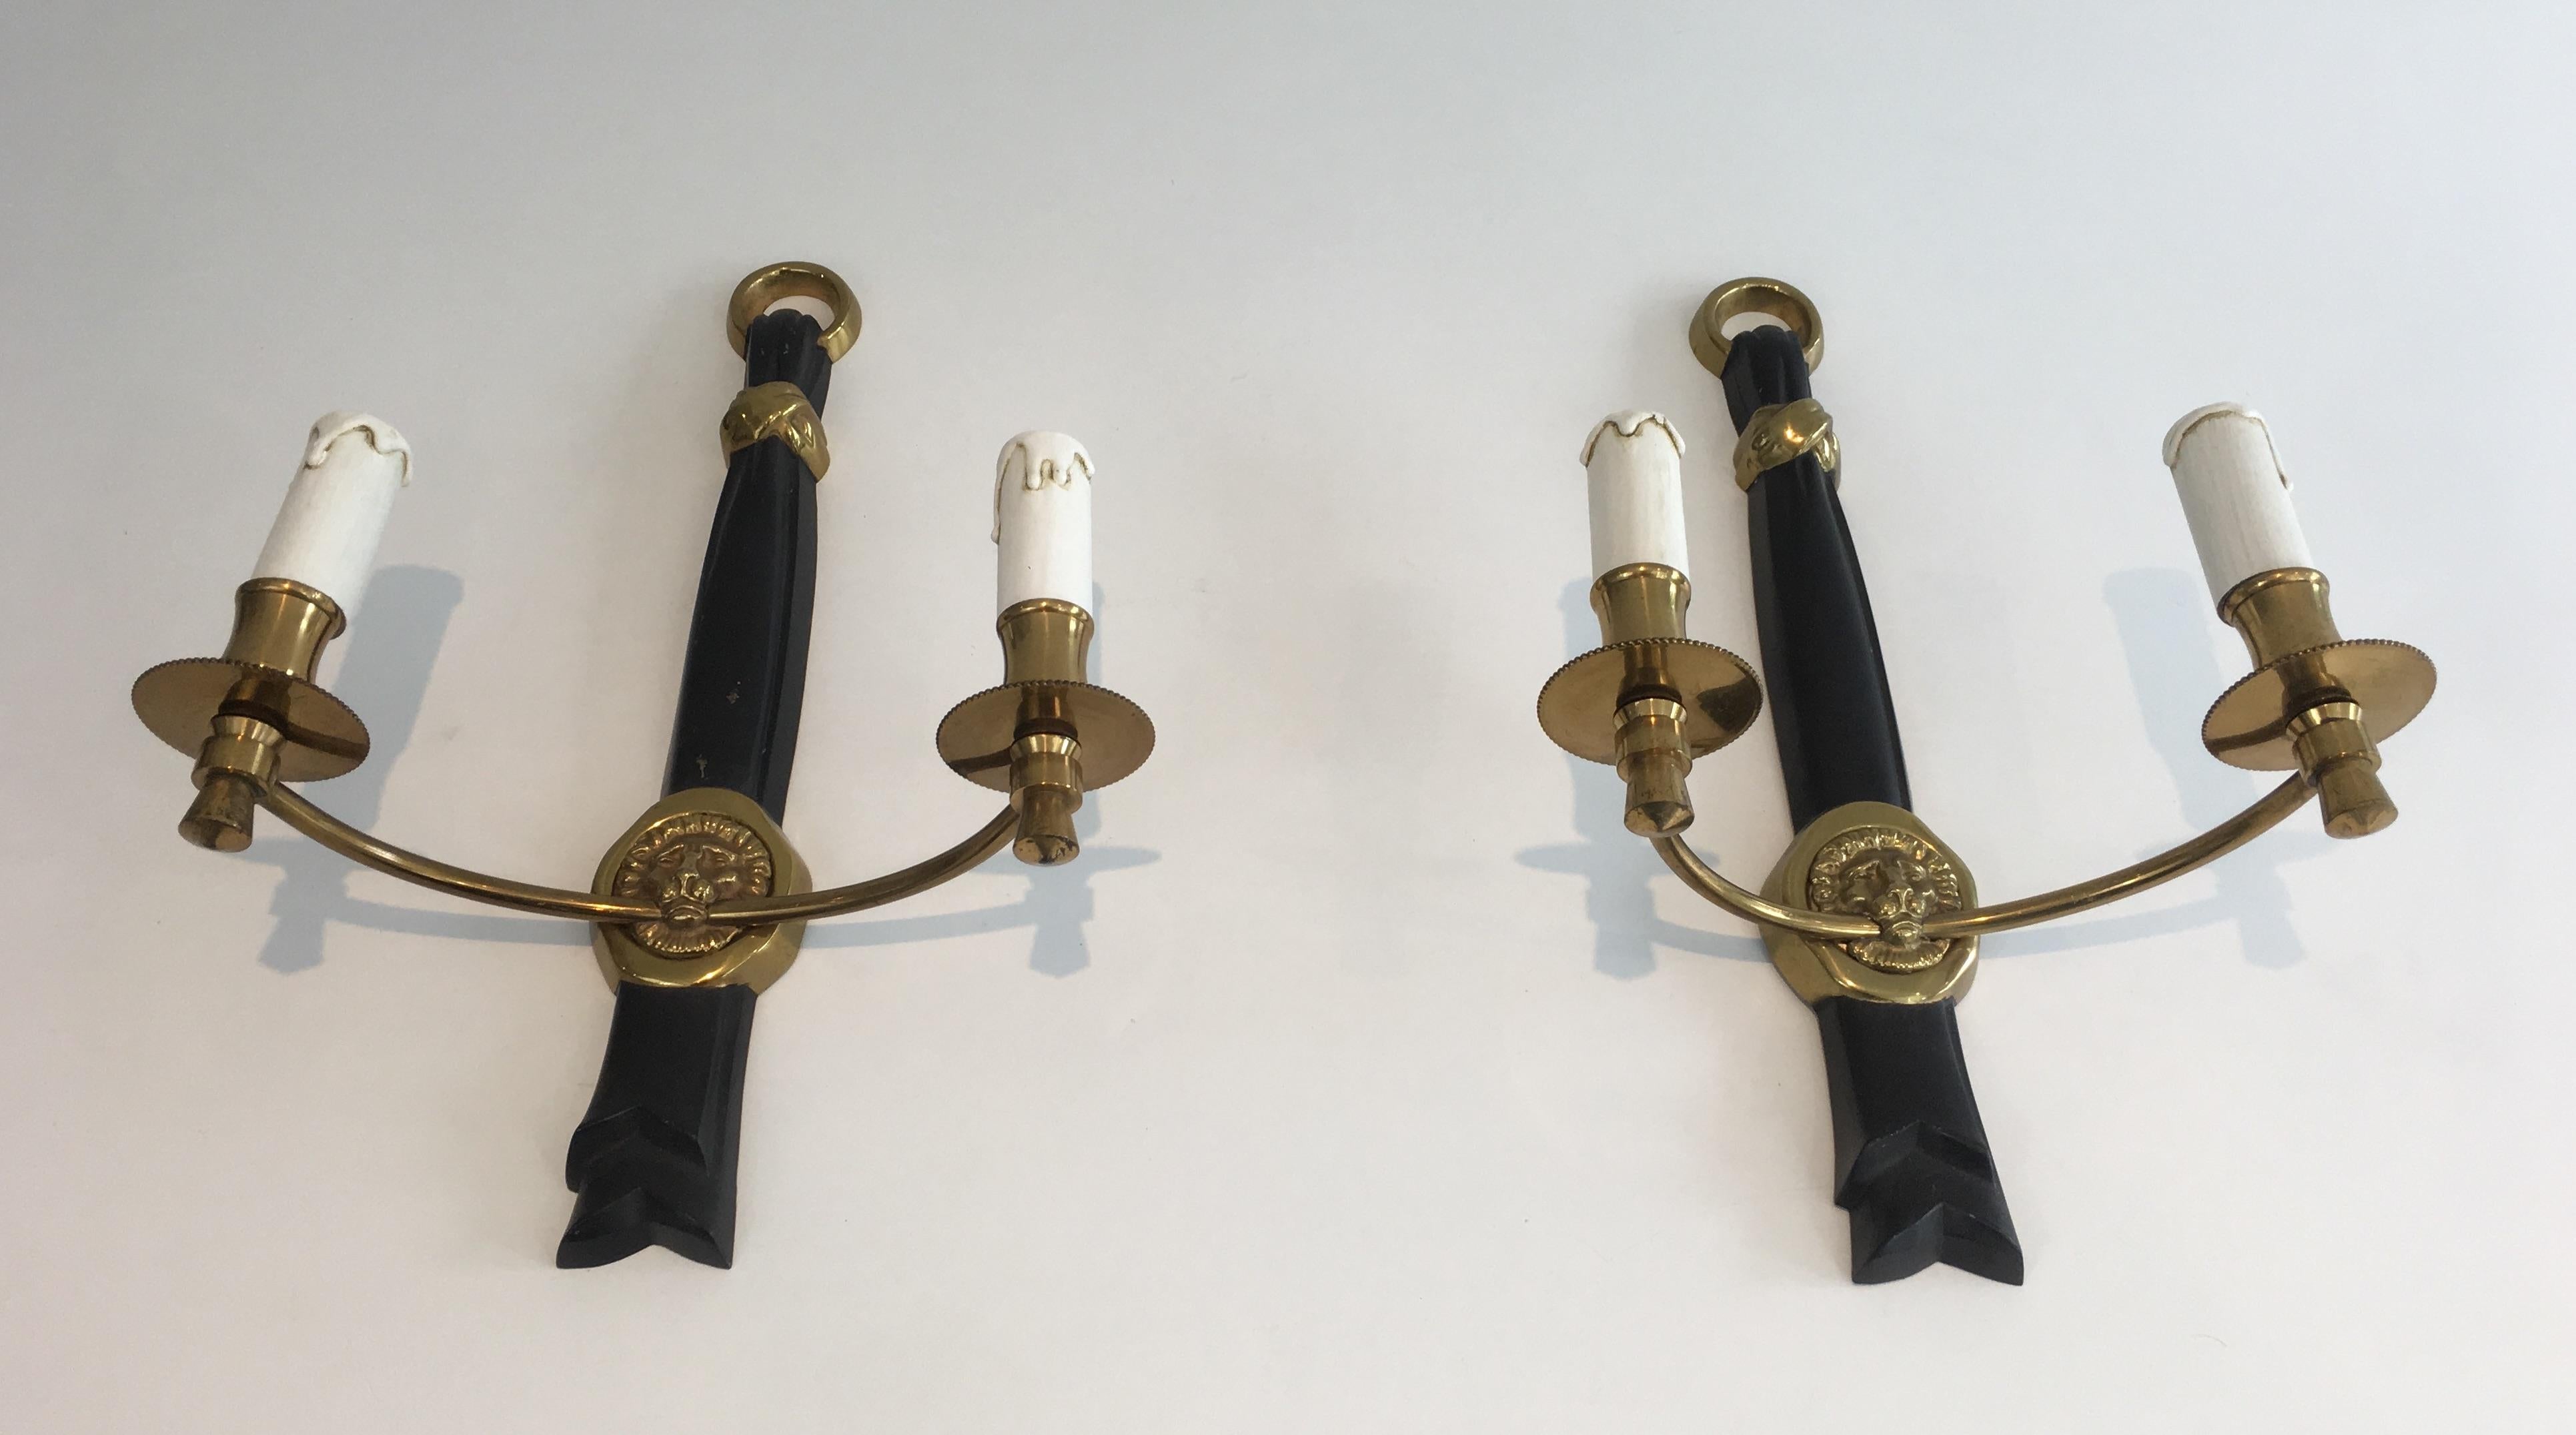 This pair of neoclassical wall sconces is made of bronze and black lacquered bronze with lion heads. This is a French work, circa 1970.